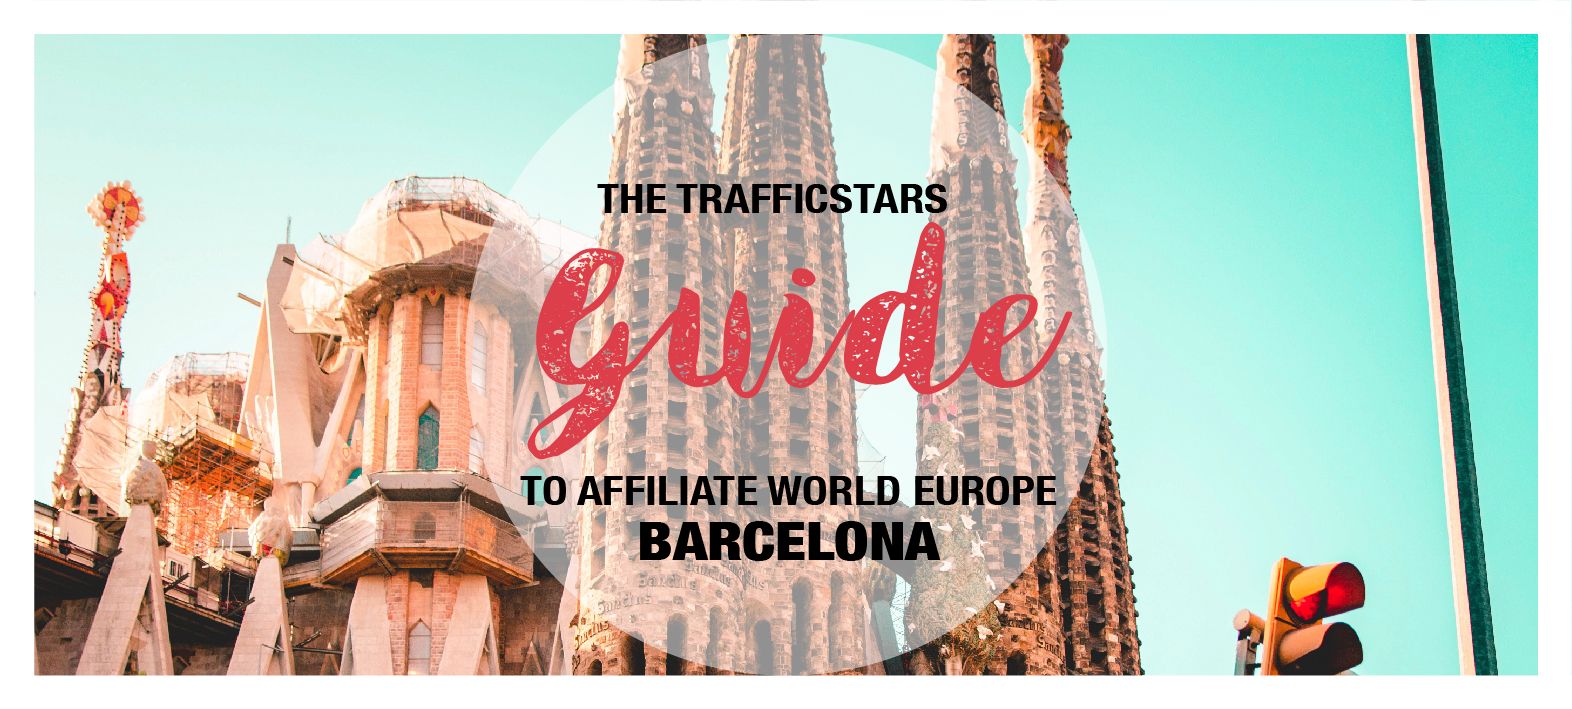 THE TRAFFICSTARS GUIDE TO AFFILIATE WORLD EUROPE BARCELONA